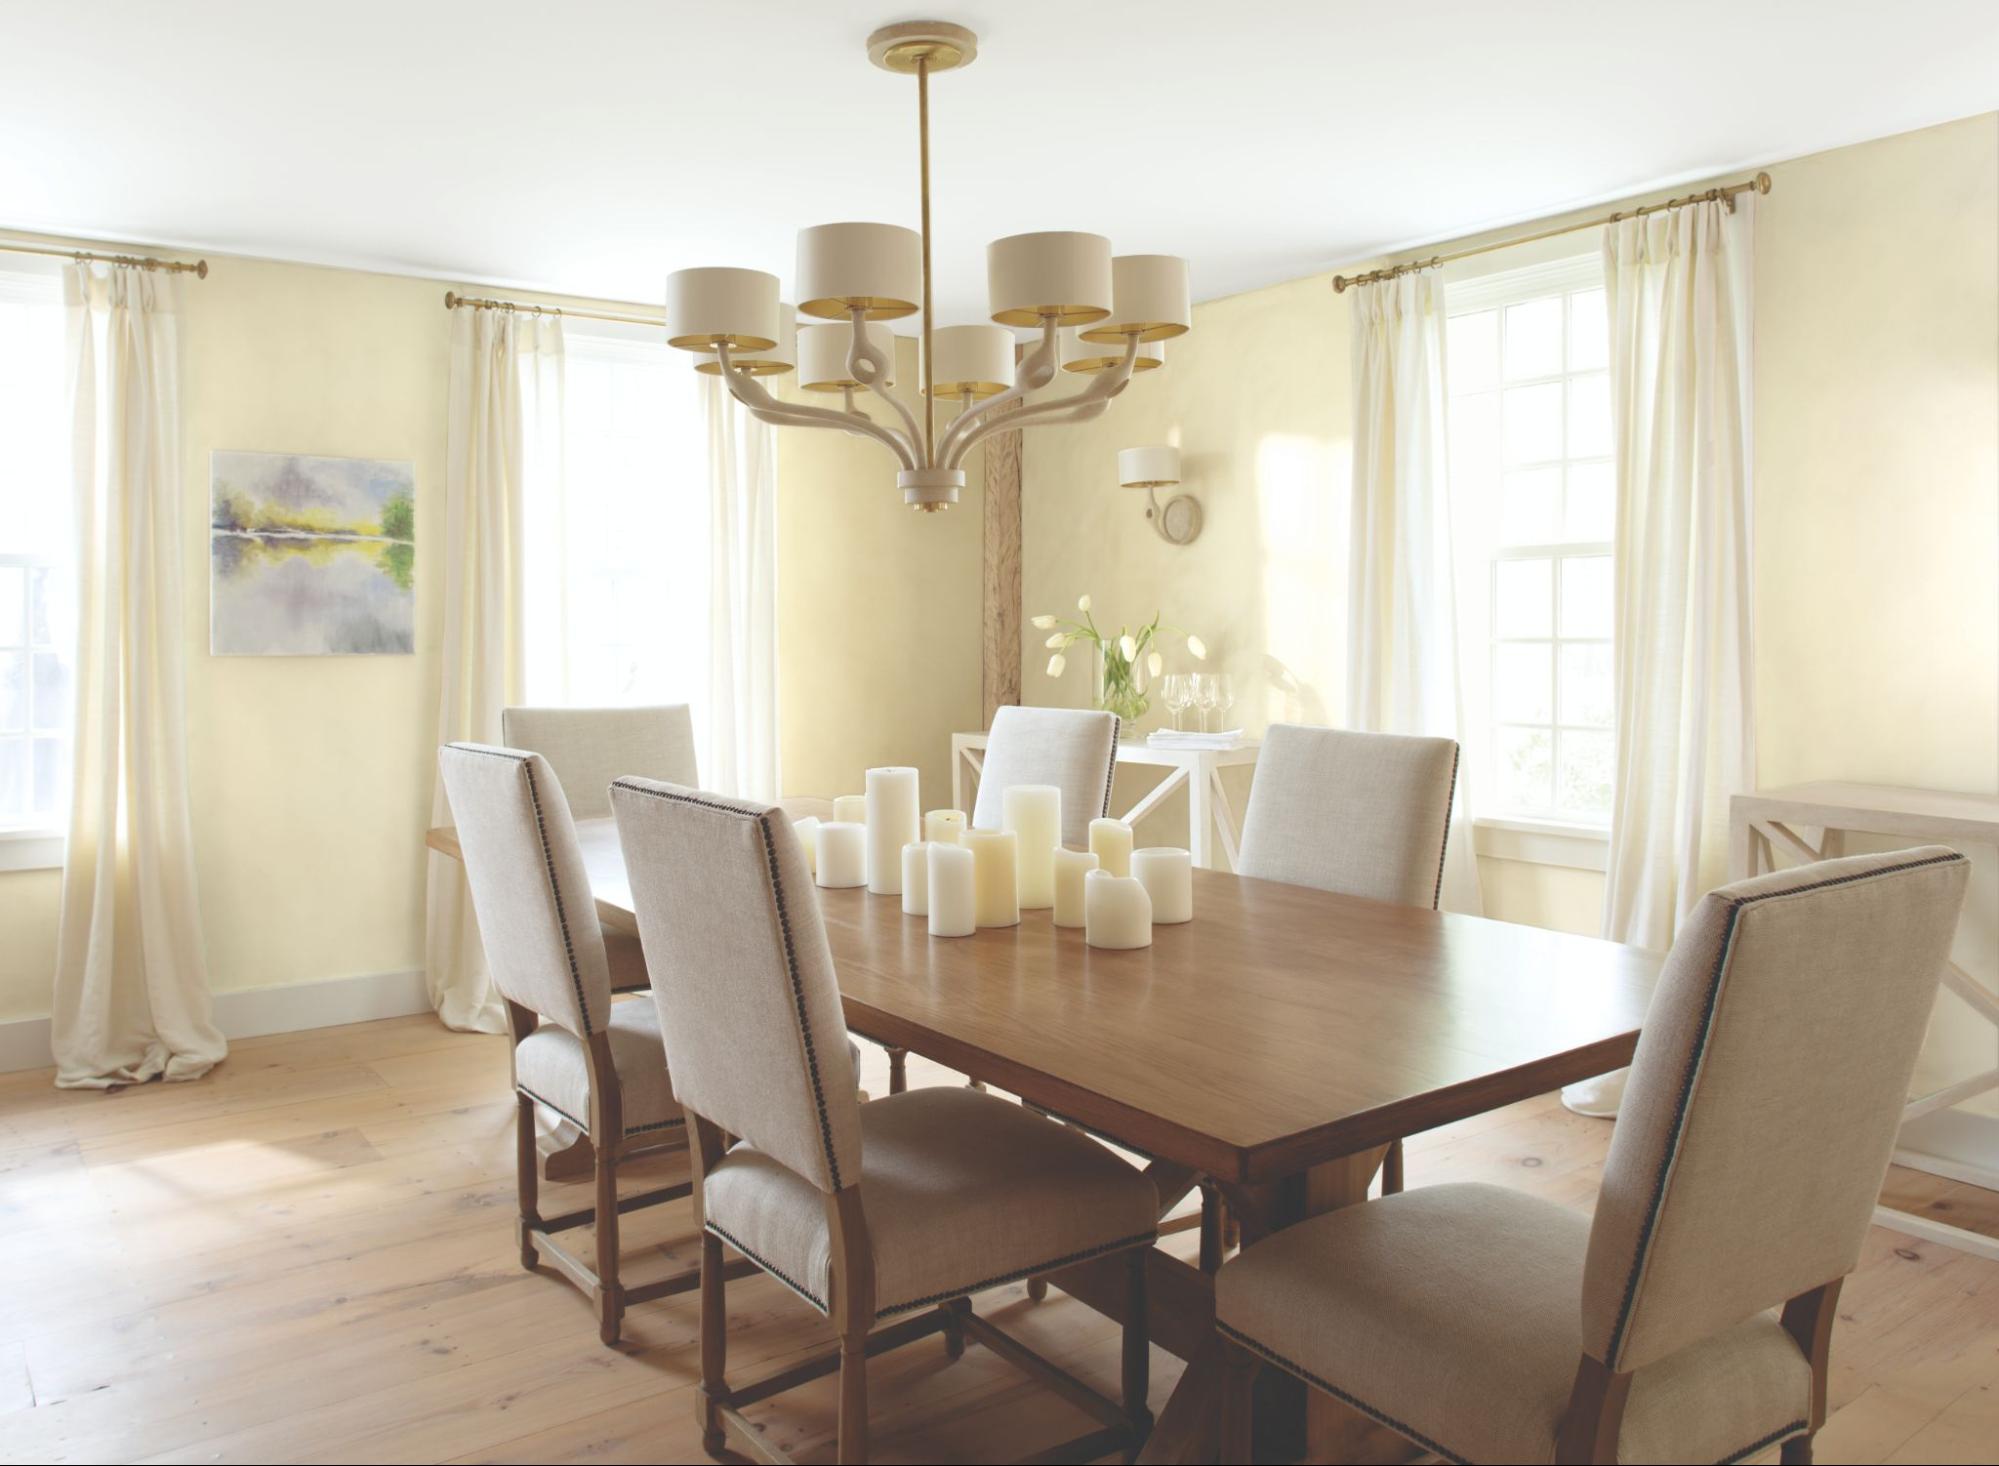 Dining room with Benjamin Moore Chantilly Lace trim